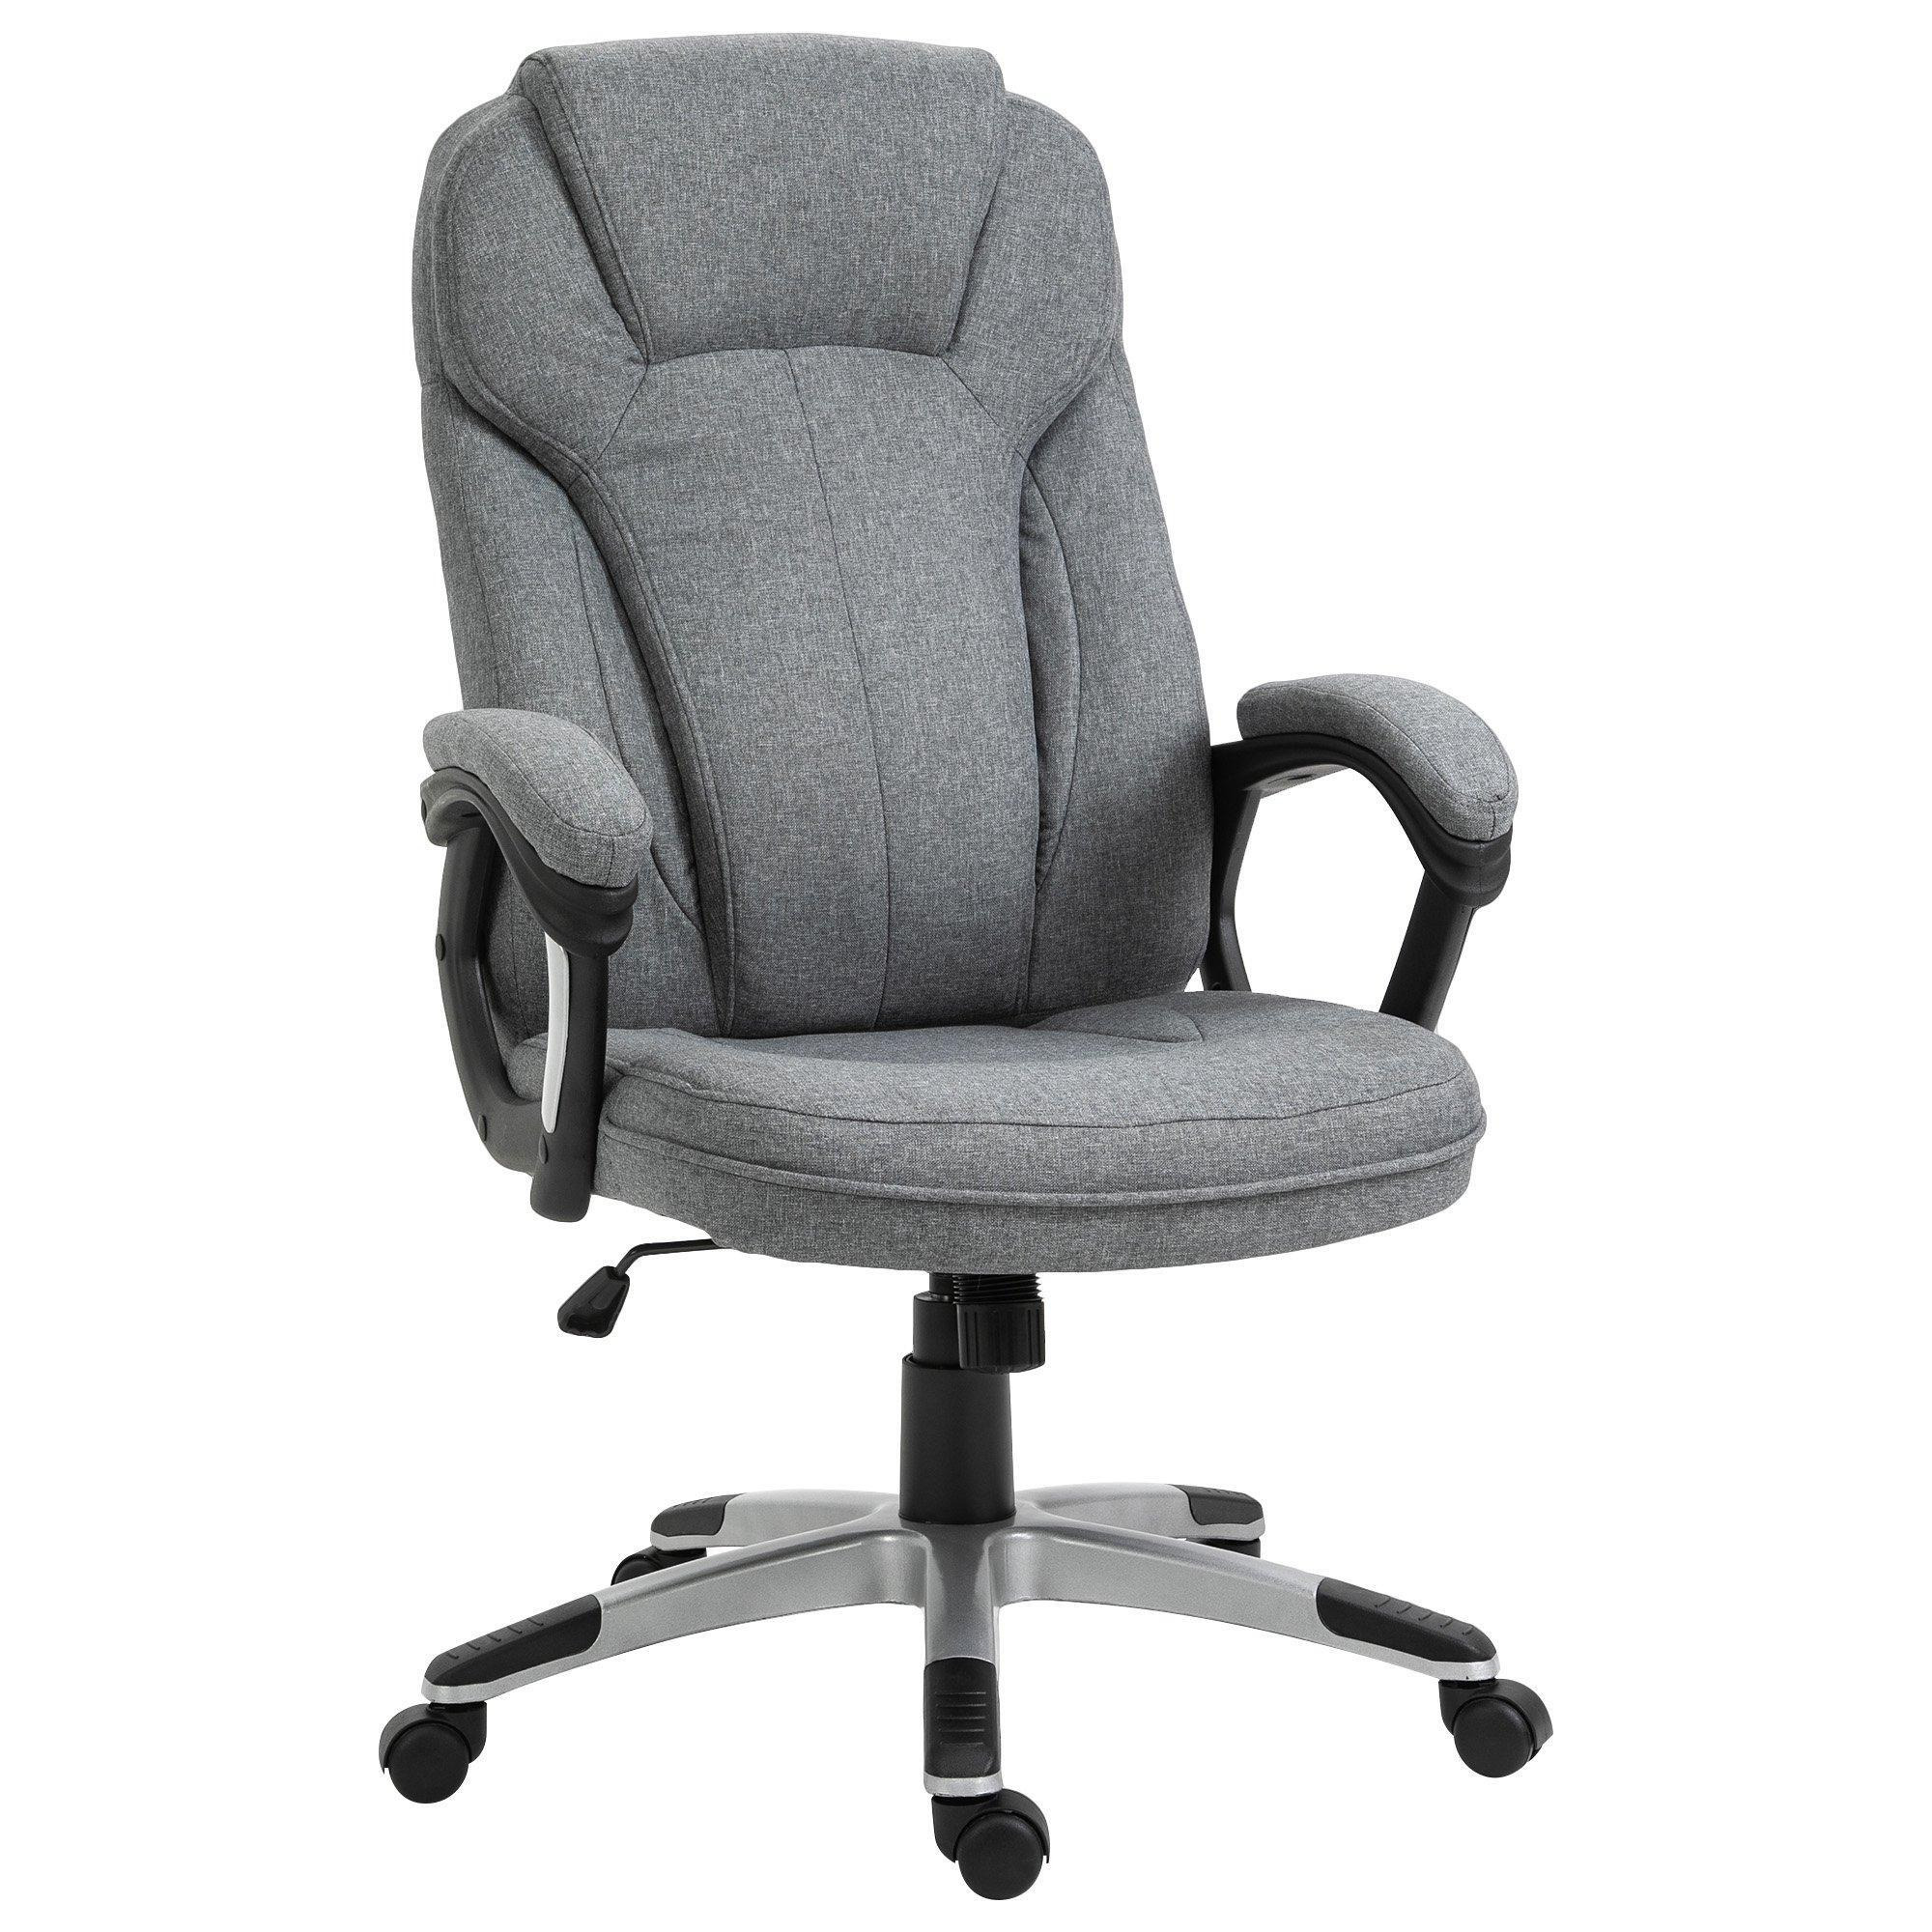 High Back Home Office Chair Height Adjustable Computer Chair - image 1